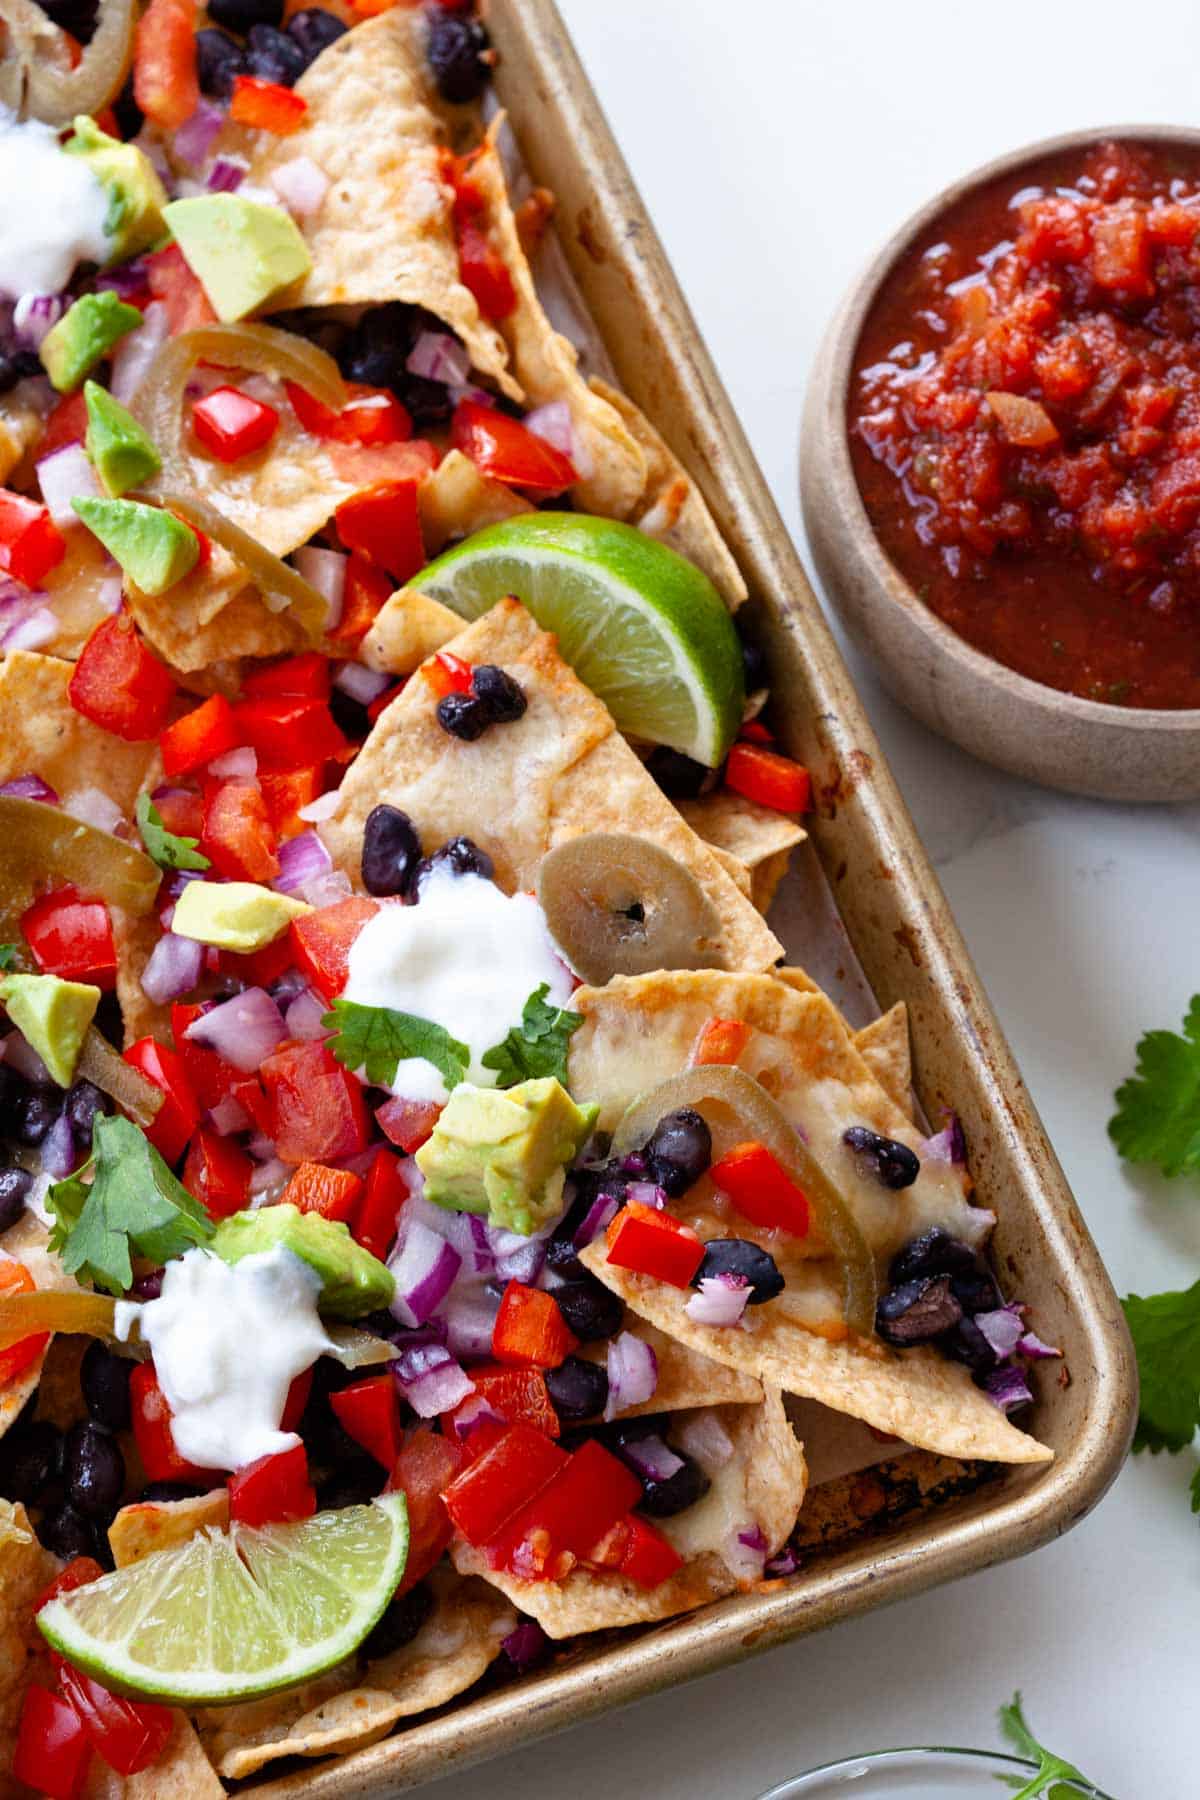 close up vegetarian nachos with toppings like avocado, limes, cilantro and bowl of salsa on the side